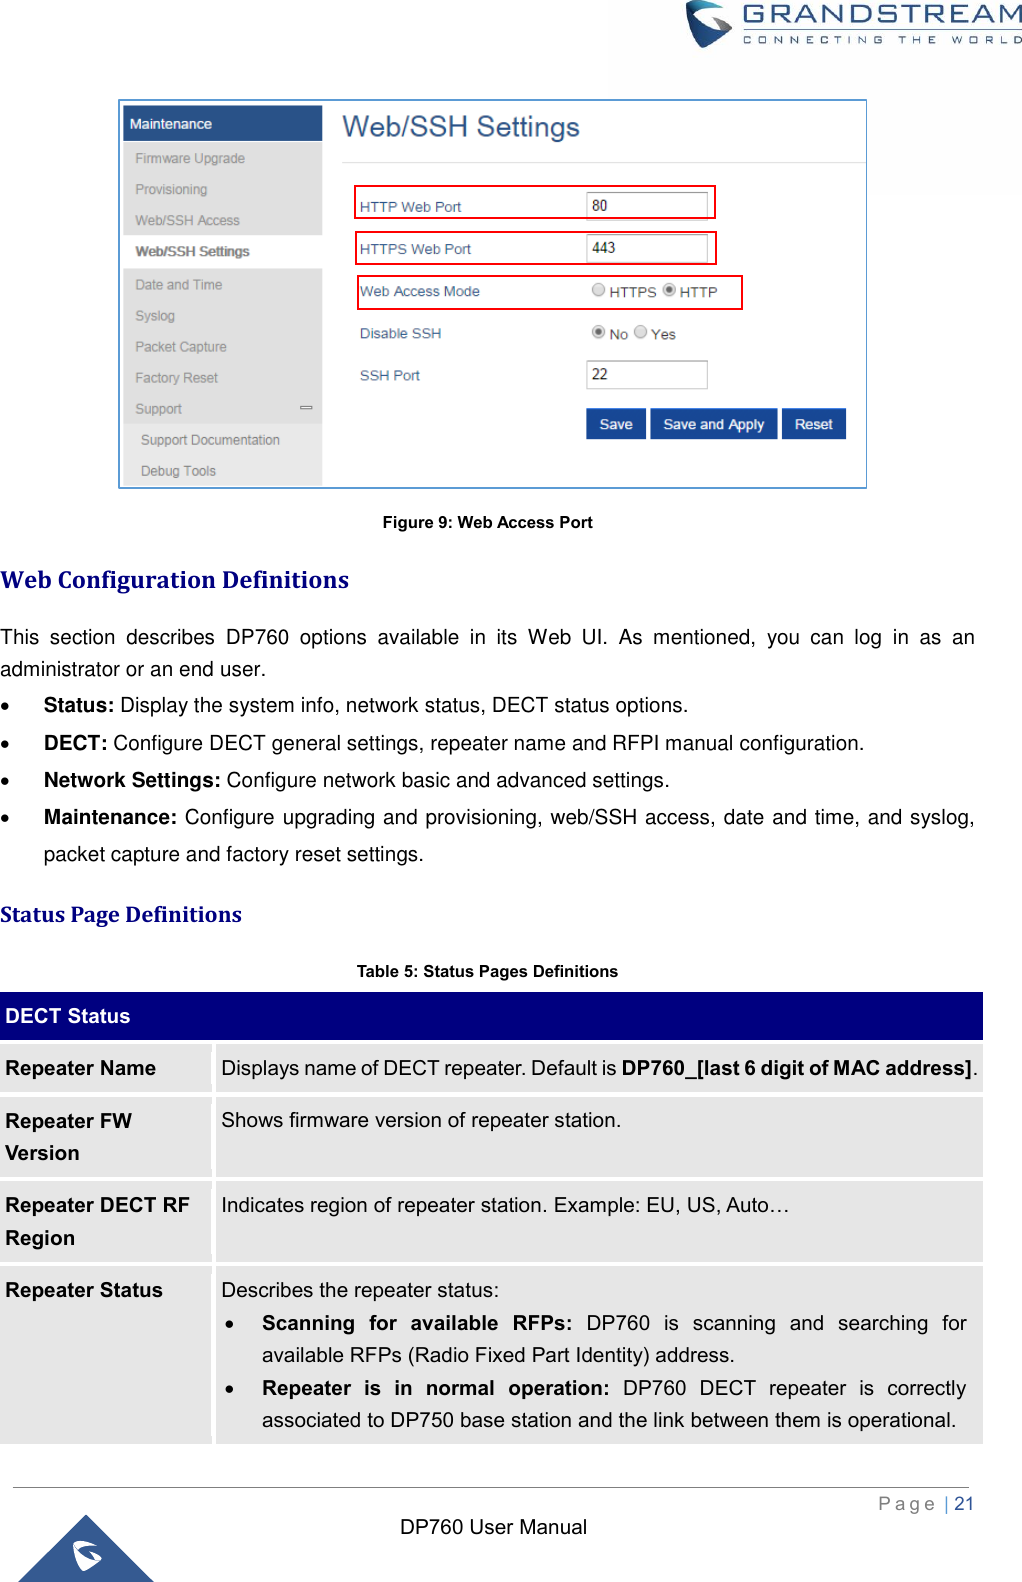  P a g e  | 21   DP760 User Manual   Figure 9: Web Access Port Web Configuration Definitions This  section  describes  DP760  options  available  in  its  Web  UI.  As  mentioned,  you  can  log  in  as  an administrator or an end user.  Status: Display the system info, network status, DECT status options.  DECT: Configure DECT general settings, repeater name and RFPI manual configuration.  Network Settings: Configure network basic and advanced settings.  Maintenance: Configure upgrading and provisioning, web/SSH access, date and time, and syslog, packet capture and factory reset settings. Status Page Definitions Table 5: Status Pages Definitions DECT Status Repeater Name Displays name of DECT repeater. Default is DP760_[last 6 digit of MAC address]. Repeater FW Version Shows firmware version of repeater station.   Repeater DECT RF Region Indicates region of repeater station. Example: EU, US, Auto… Repeater Status Describes the repeater status:  Scanning  for  available  RFPs:  DP760  is  scanning  and  searching  for available RFPs (Radio Fixed Part Identity) address.  Repeater  is  in  normal  operation:  DP760  DECT  repeater  is  correctly associated to DP750 base station and the link between them is operational.   